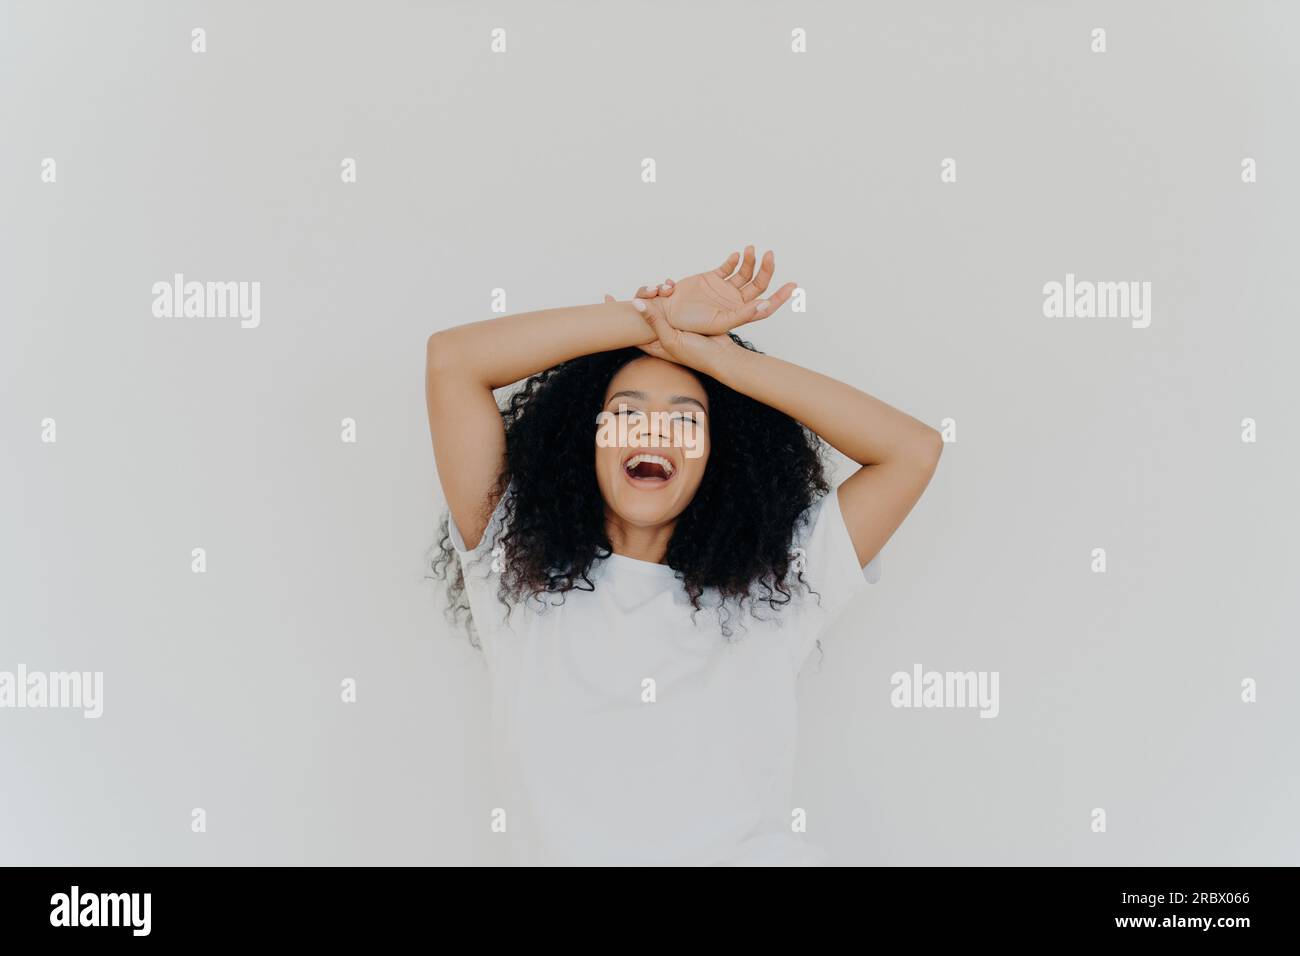 Overjoyed curly-haired lady, hands on forehead, laughing with mouth wide open, energetic vibes. Casual attire, white studio backdrop. Hilarious joke! Stock Photo